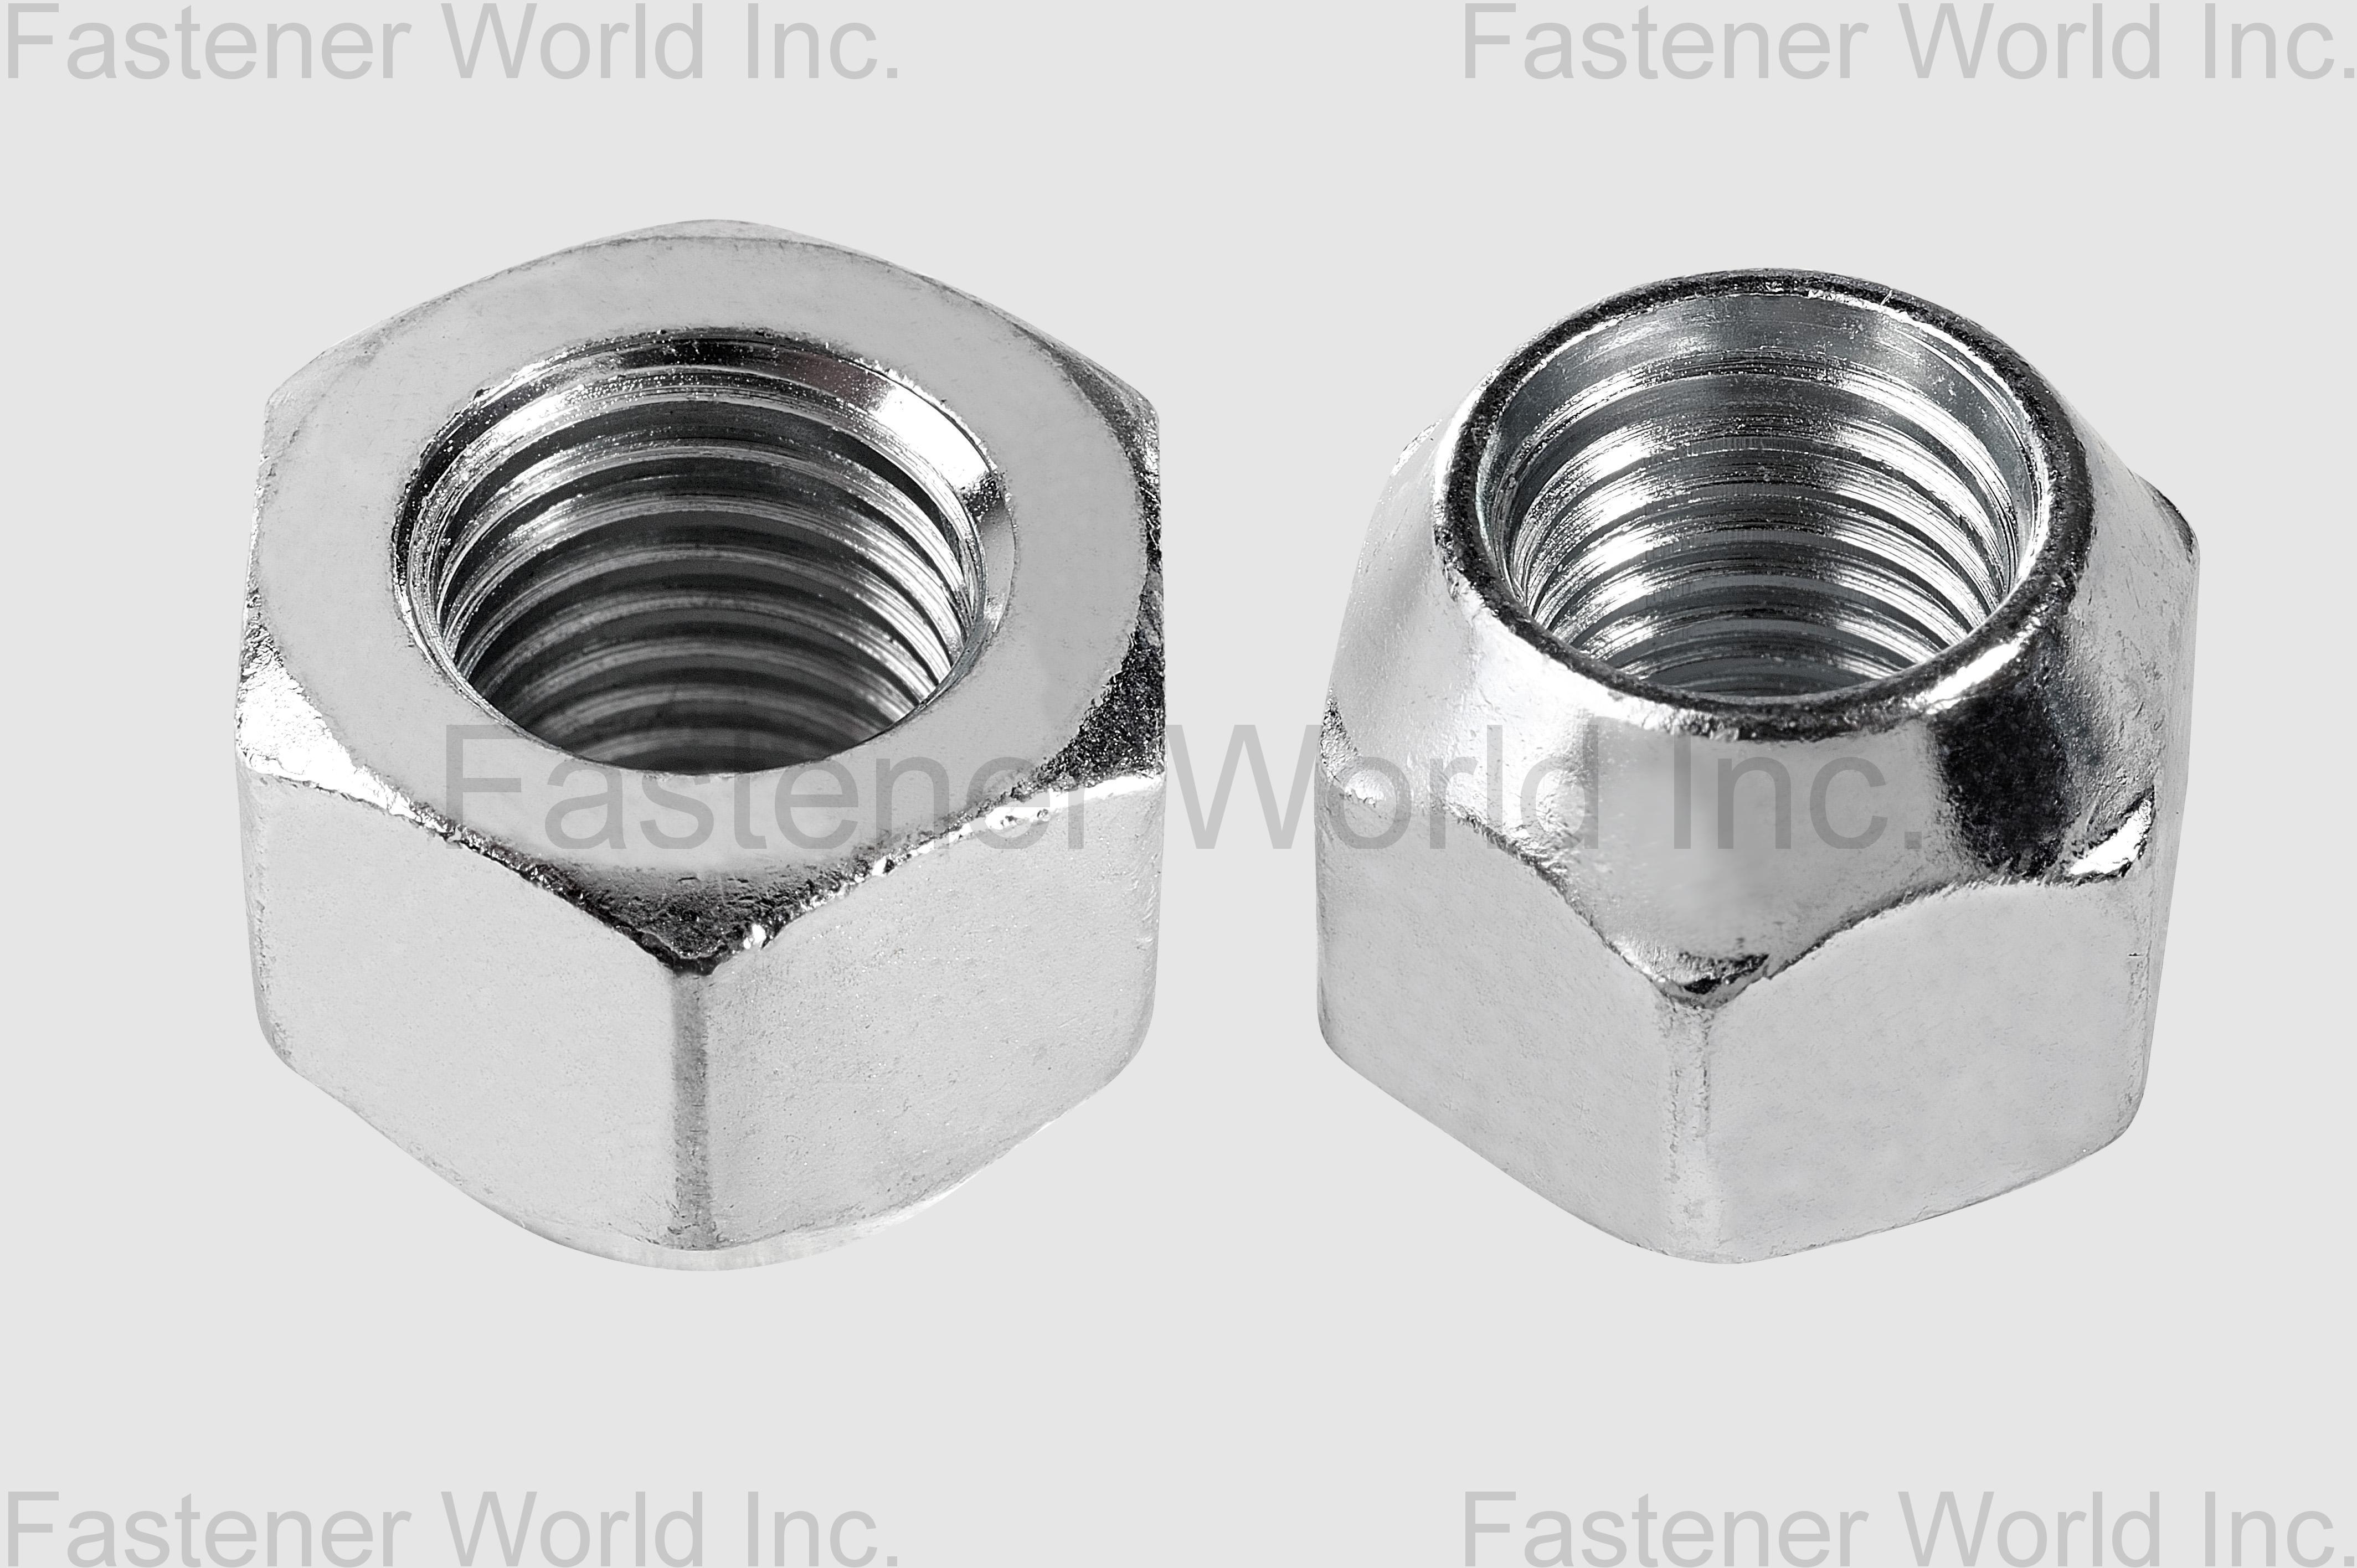 COPA FLANGE FASTENERS CORP. , HEX FLANGE NUT , Hexagon Nuts